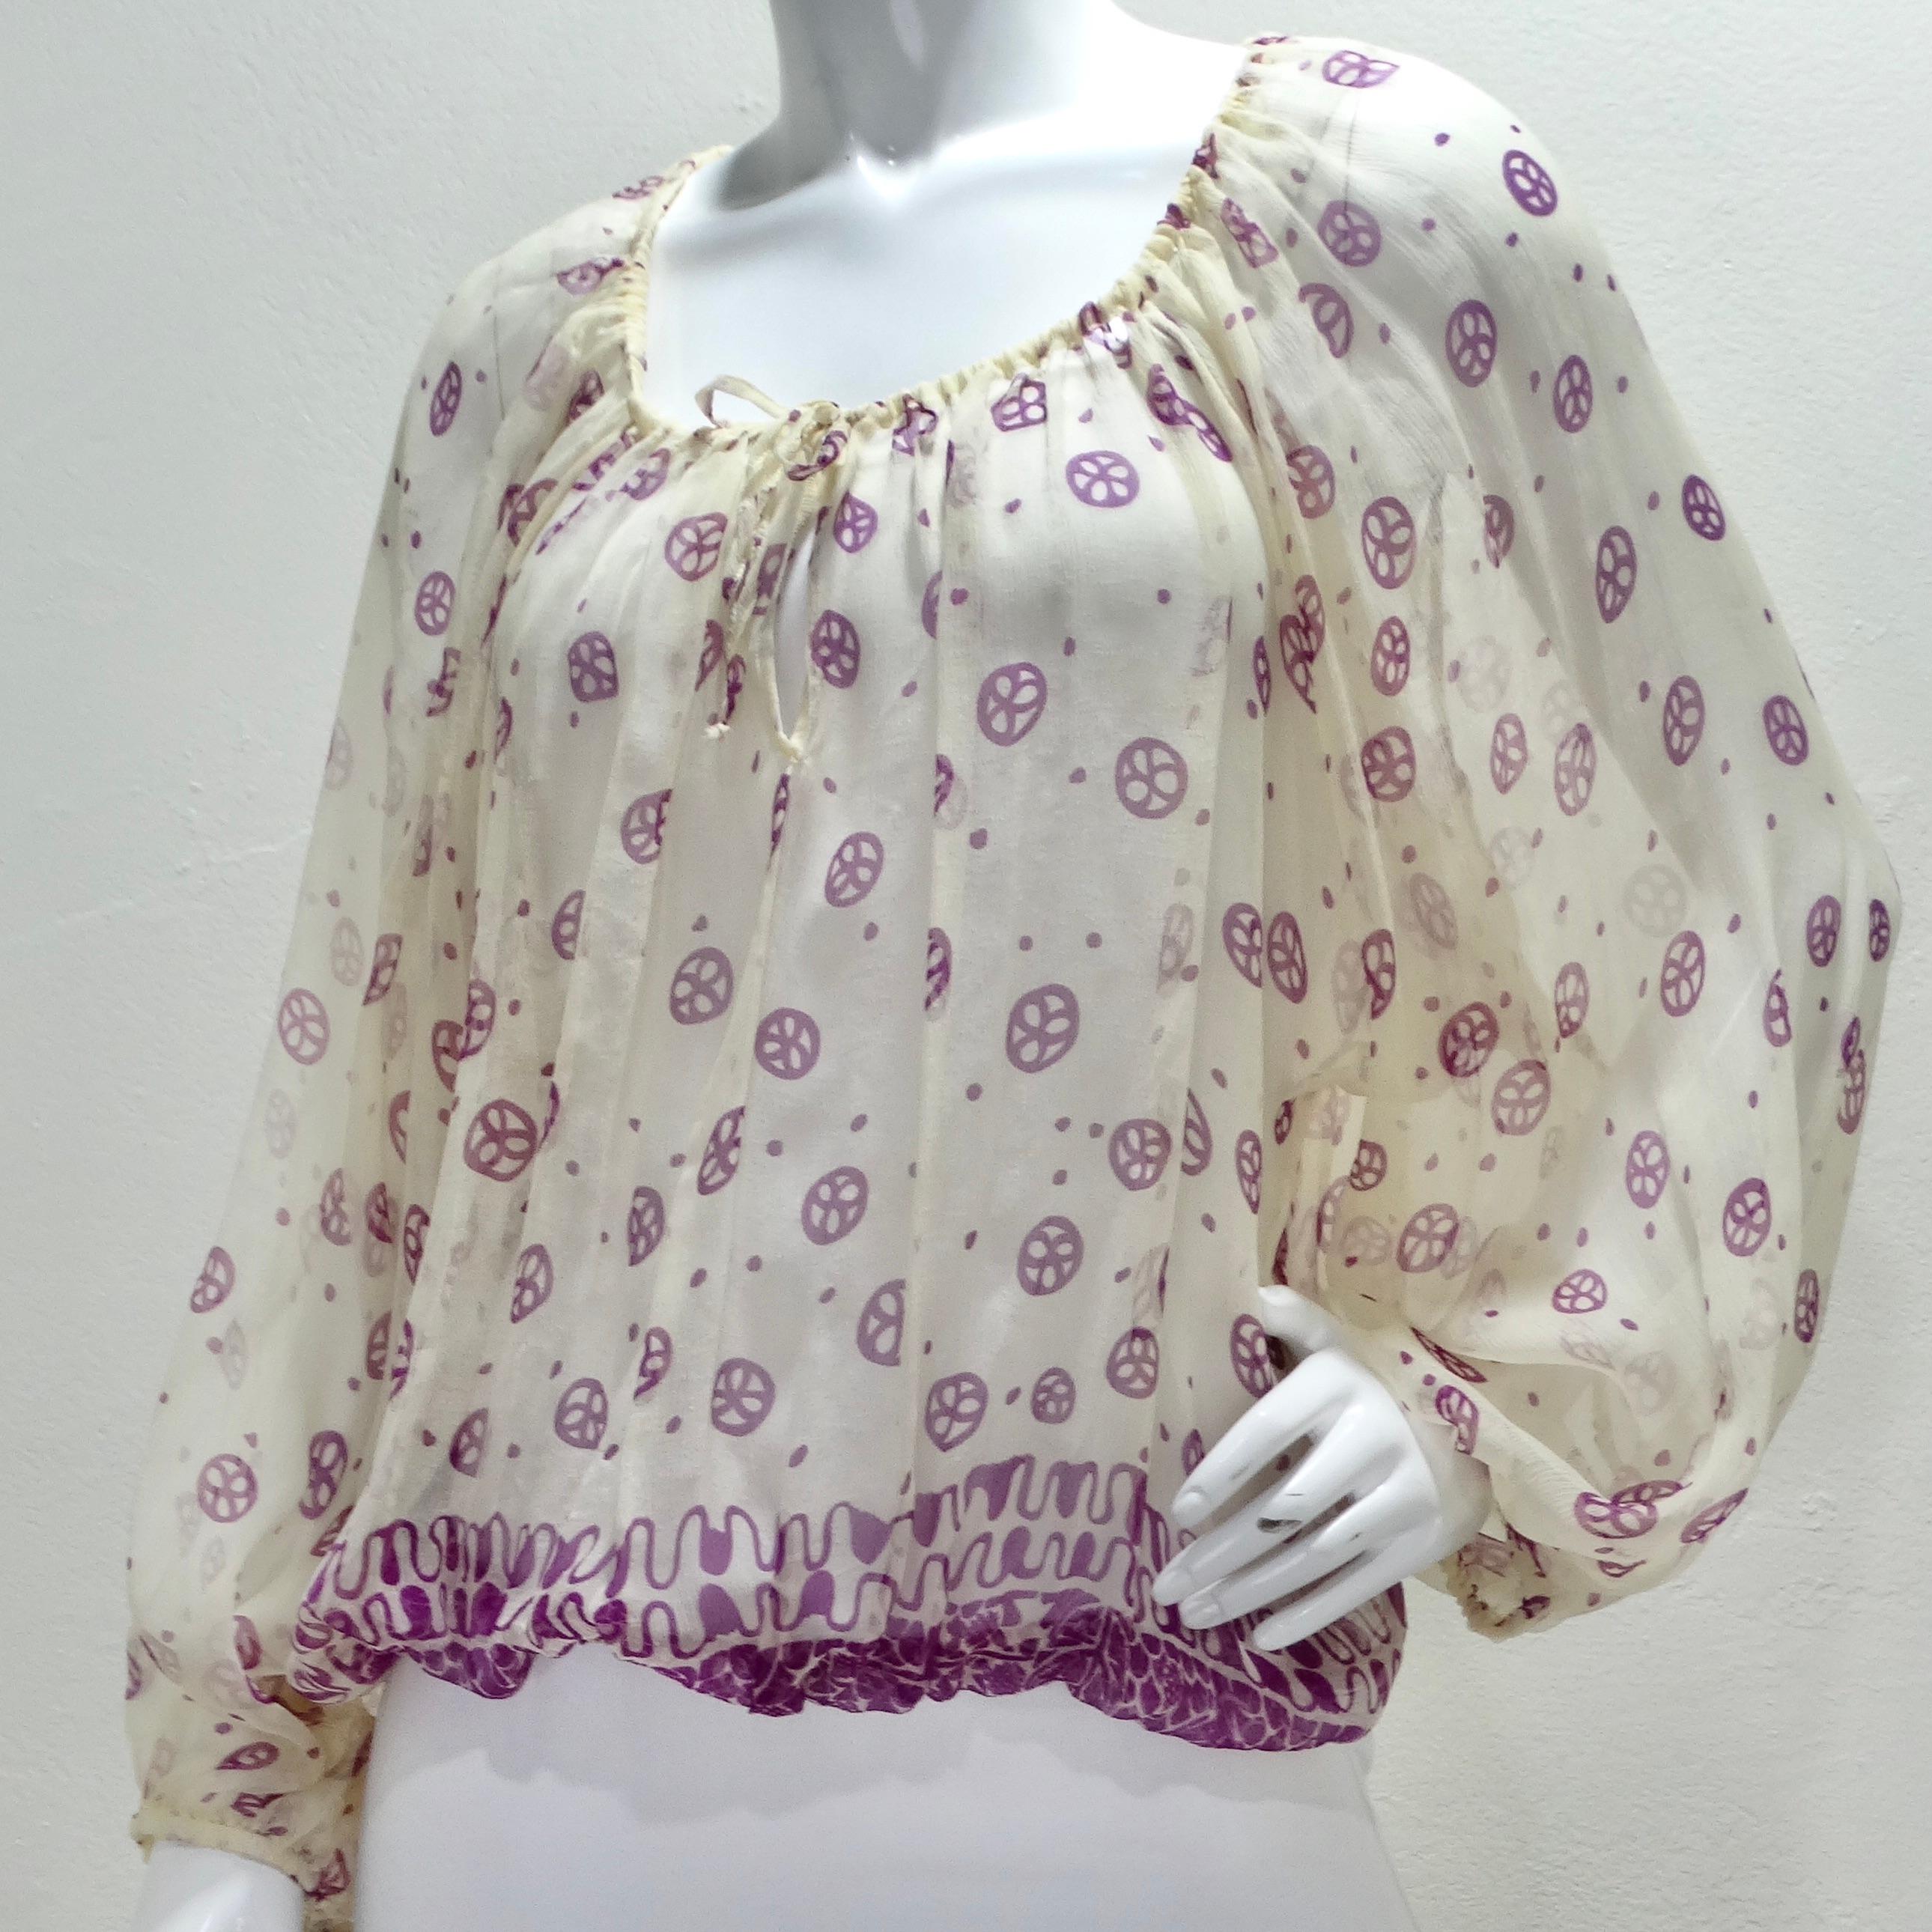 Indulge in vintage luxury with this exquisite Vintage Jean Paul Gaultier Purple Print Blouse. This billowing, long-sleeved blouse is a masterpiece of fashion design. Crafted from a lightweight, sheer ivory fabric adorned with captivating purple